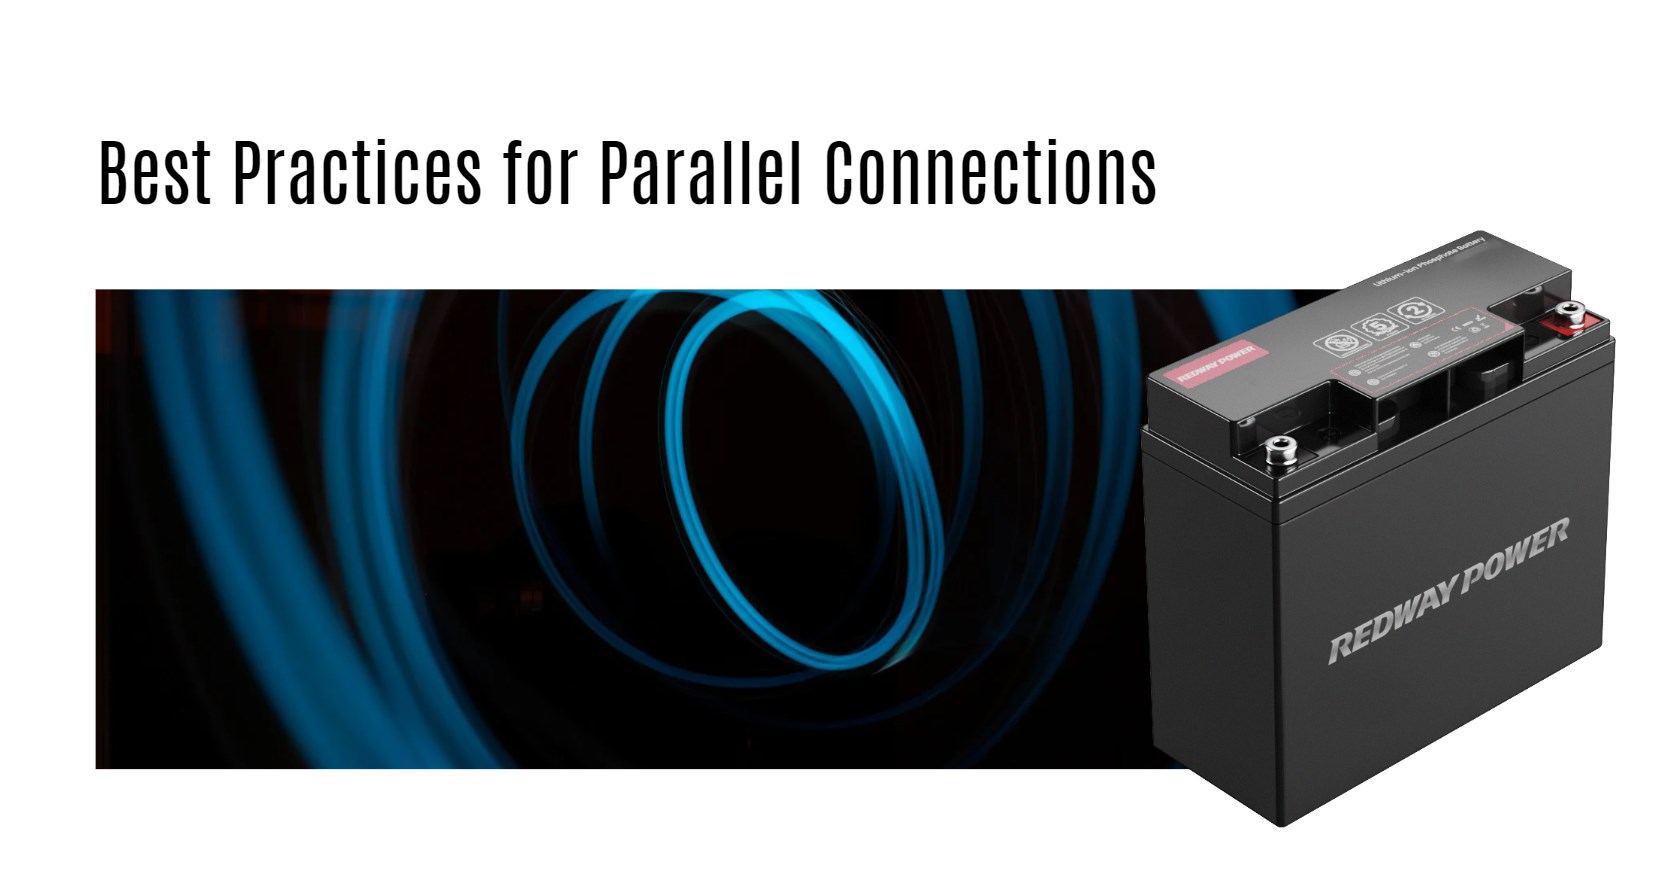 Best Practices for Parallel Connections